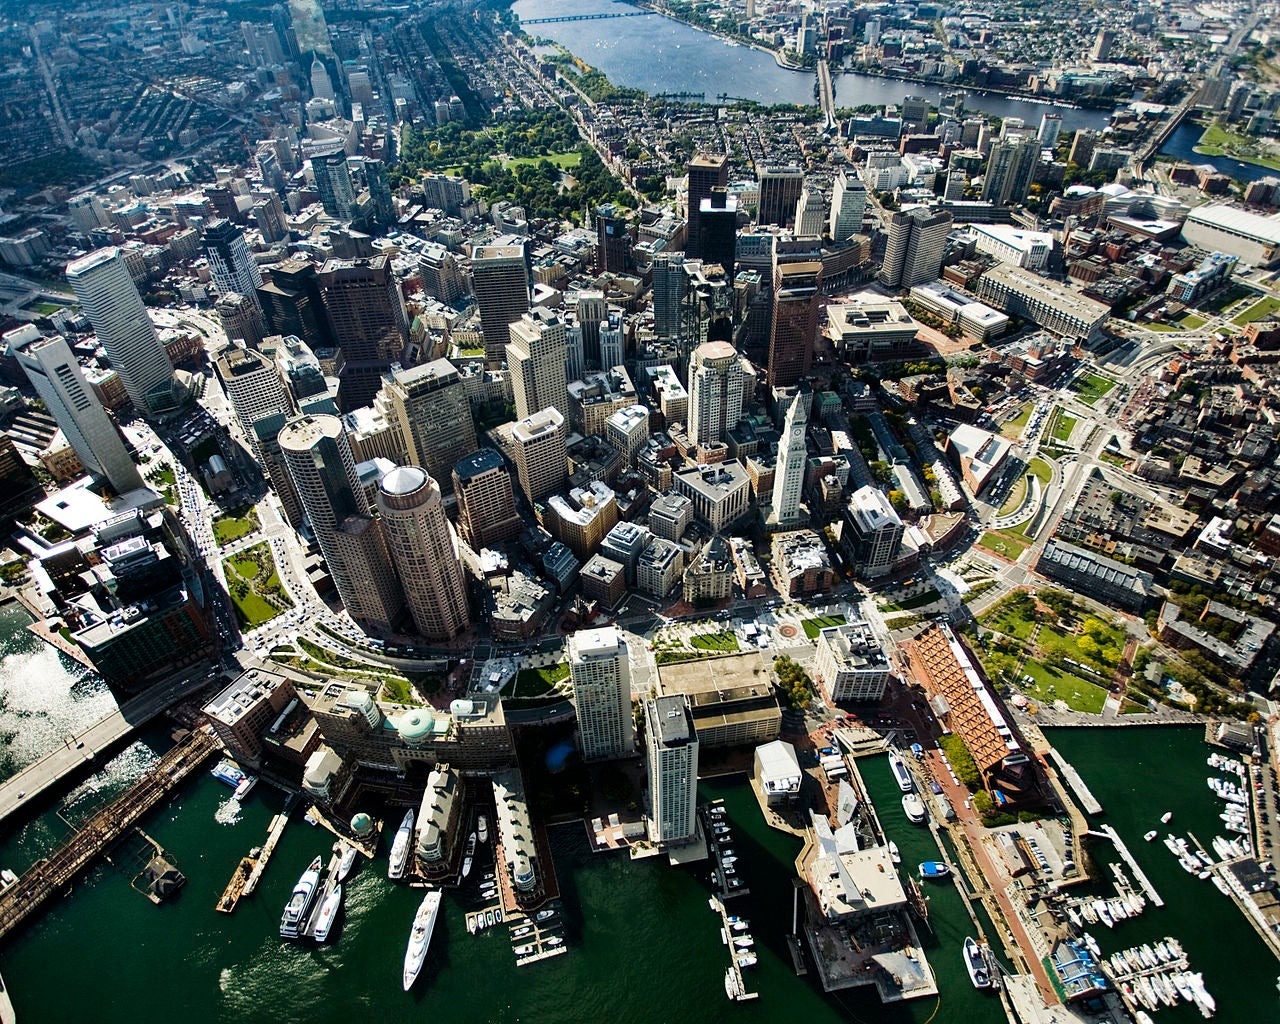 An aerial view of the Rose Fitzgerald Kennedy Greenway in downtown Boston. (Image credit: Hellogreenway from Wikipedia)